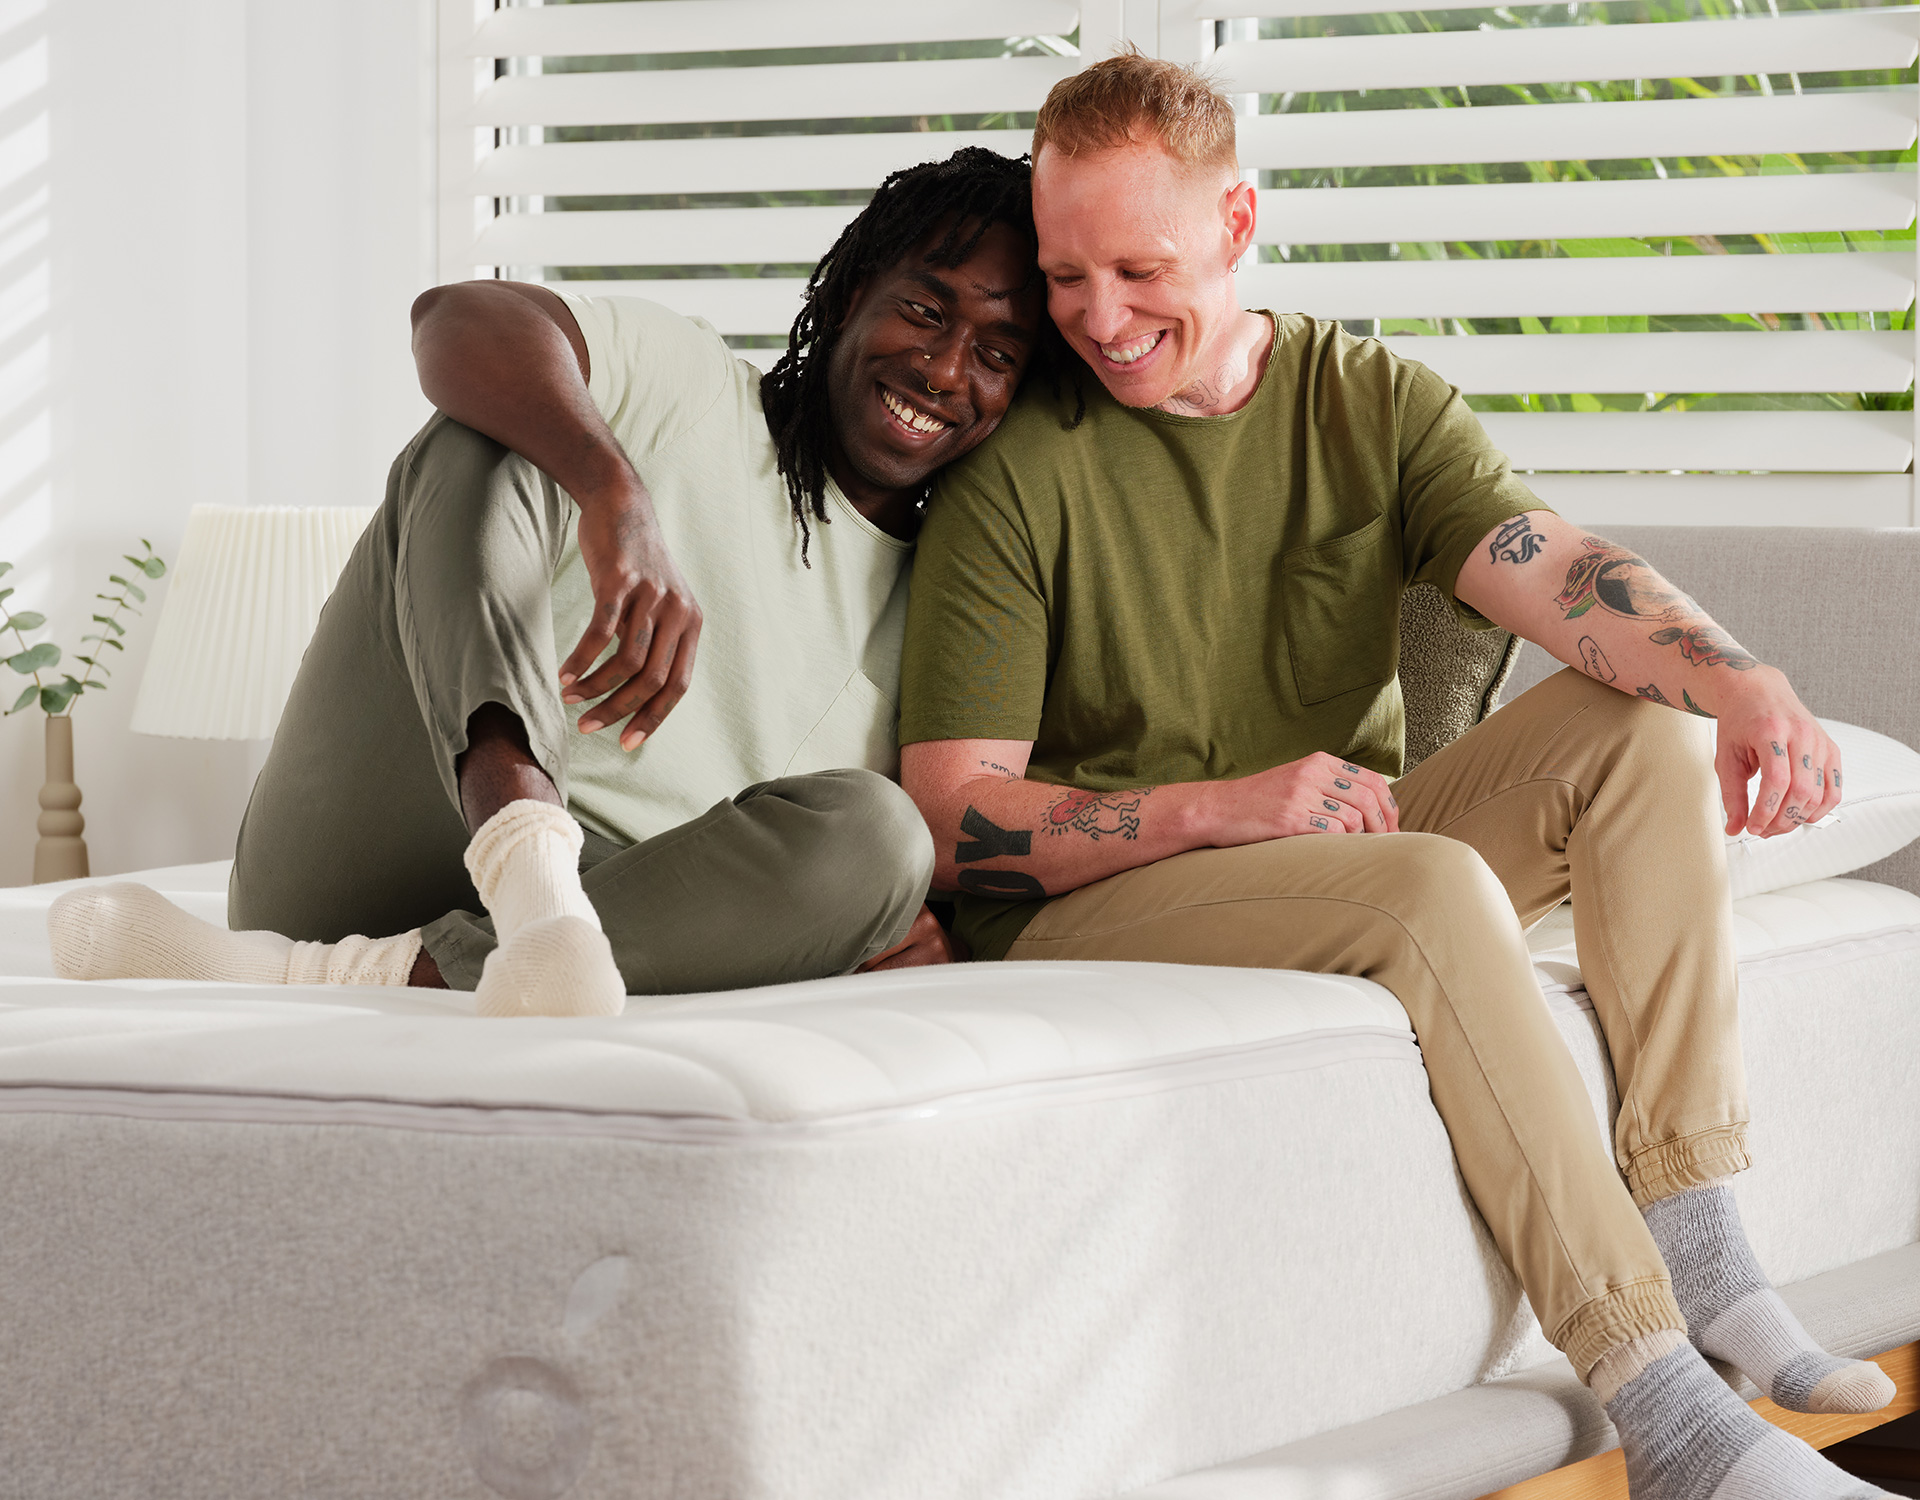 Two happy men sitting on their new Koala mattress discover just how good the mattress is